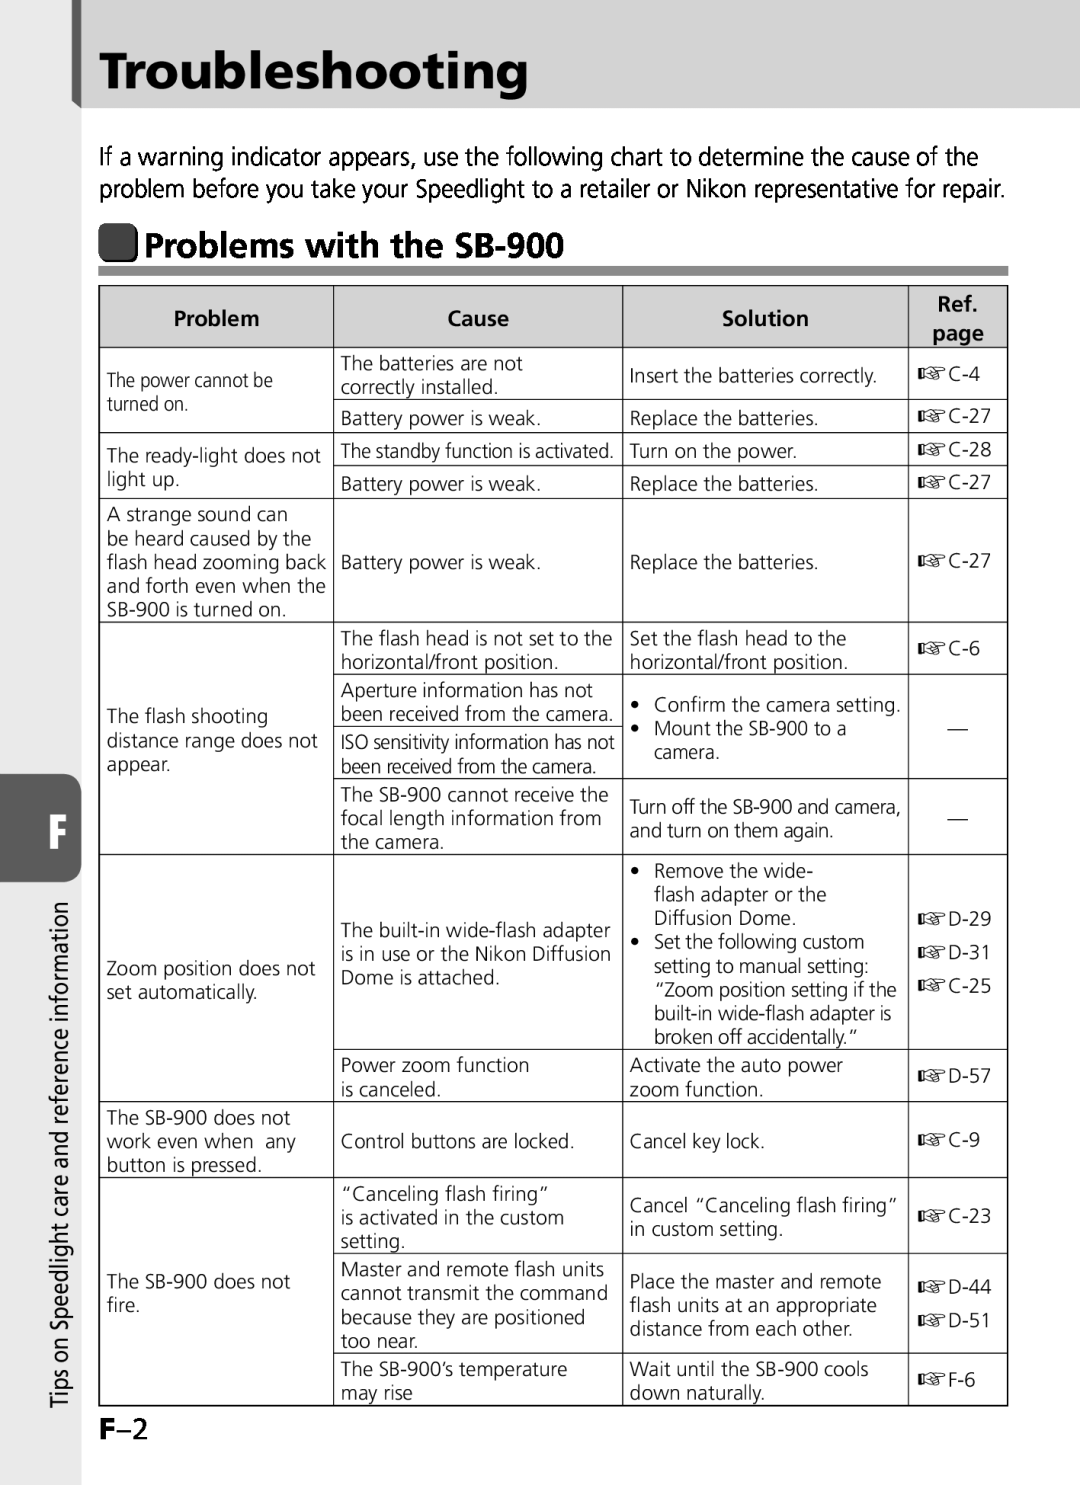 Univex user manual Troubleshooting, Problems with the SB-900, Cause, Solution, page 